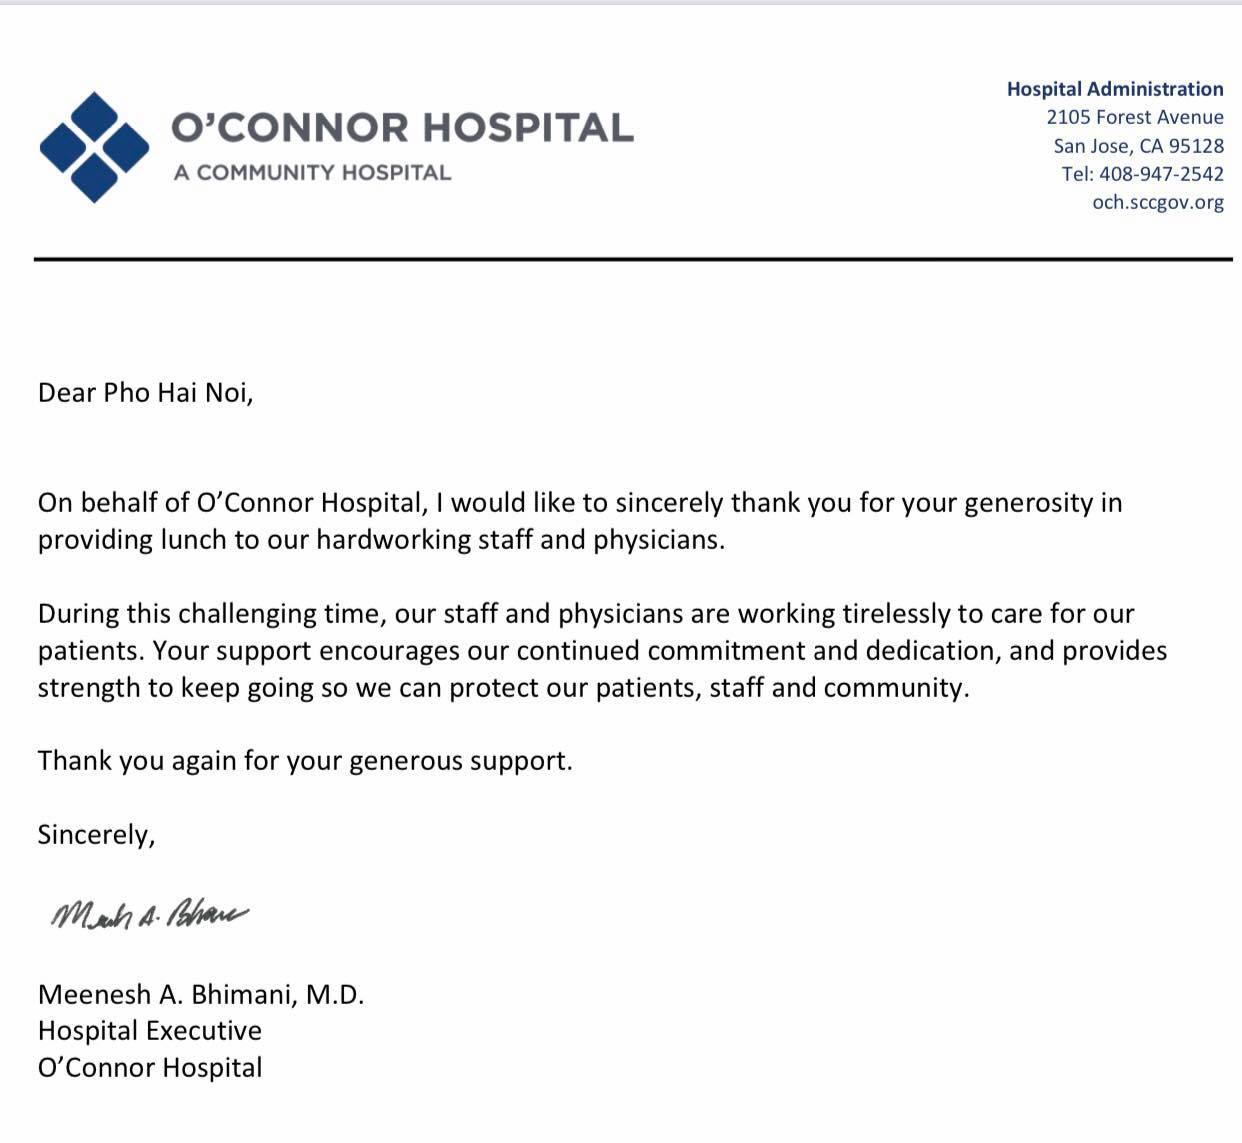 A letter from Dr. Meenesh A. Bhimani, an executive at O'Connor Hospital in San Jose, California, the United States, sent to the Pho Ha Noi team thanking them for providing lunch for the infirmary's staff and physicians.